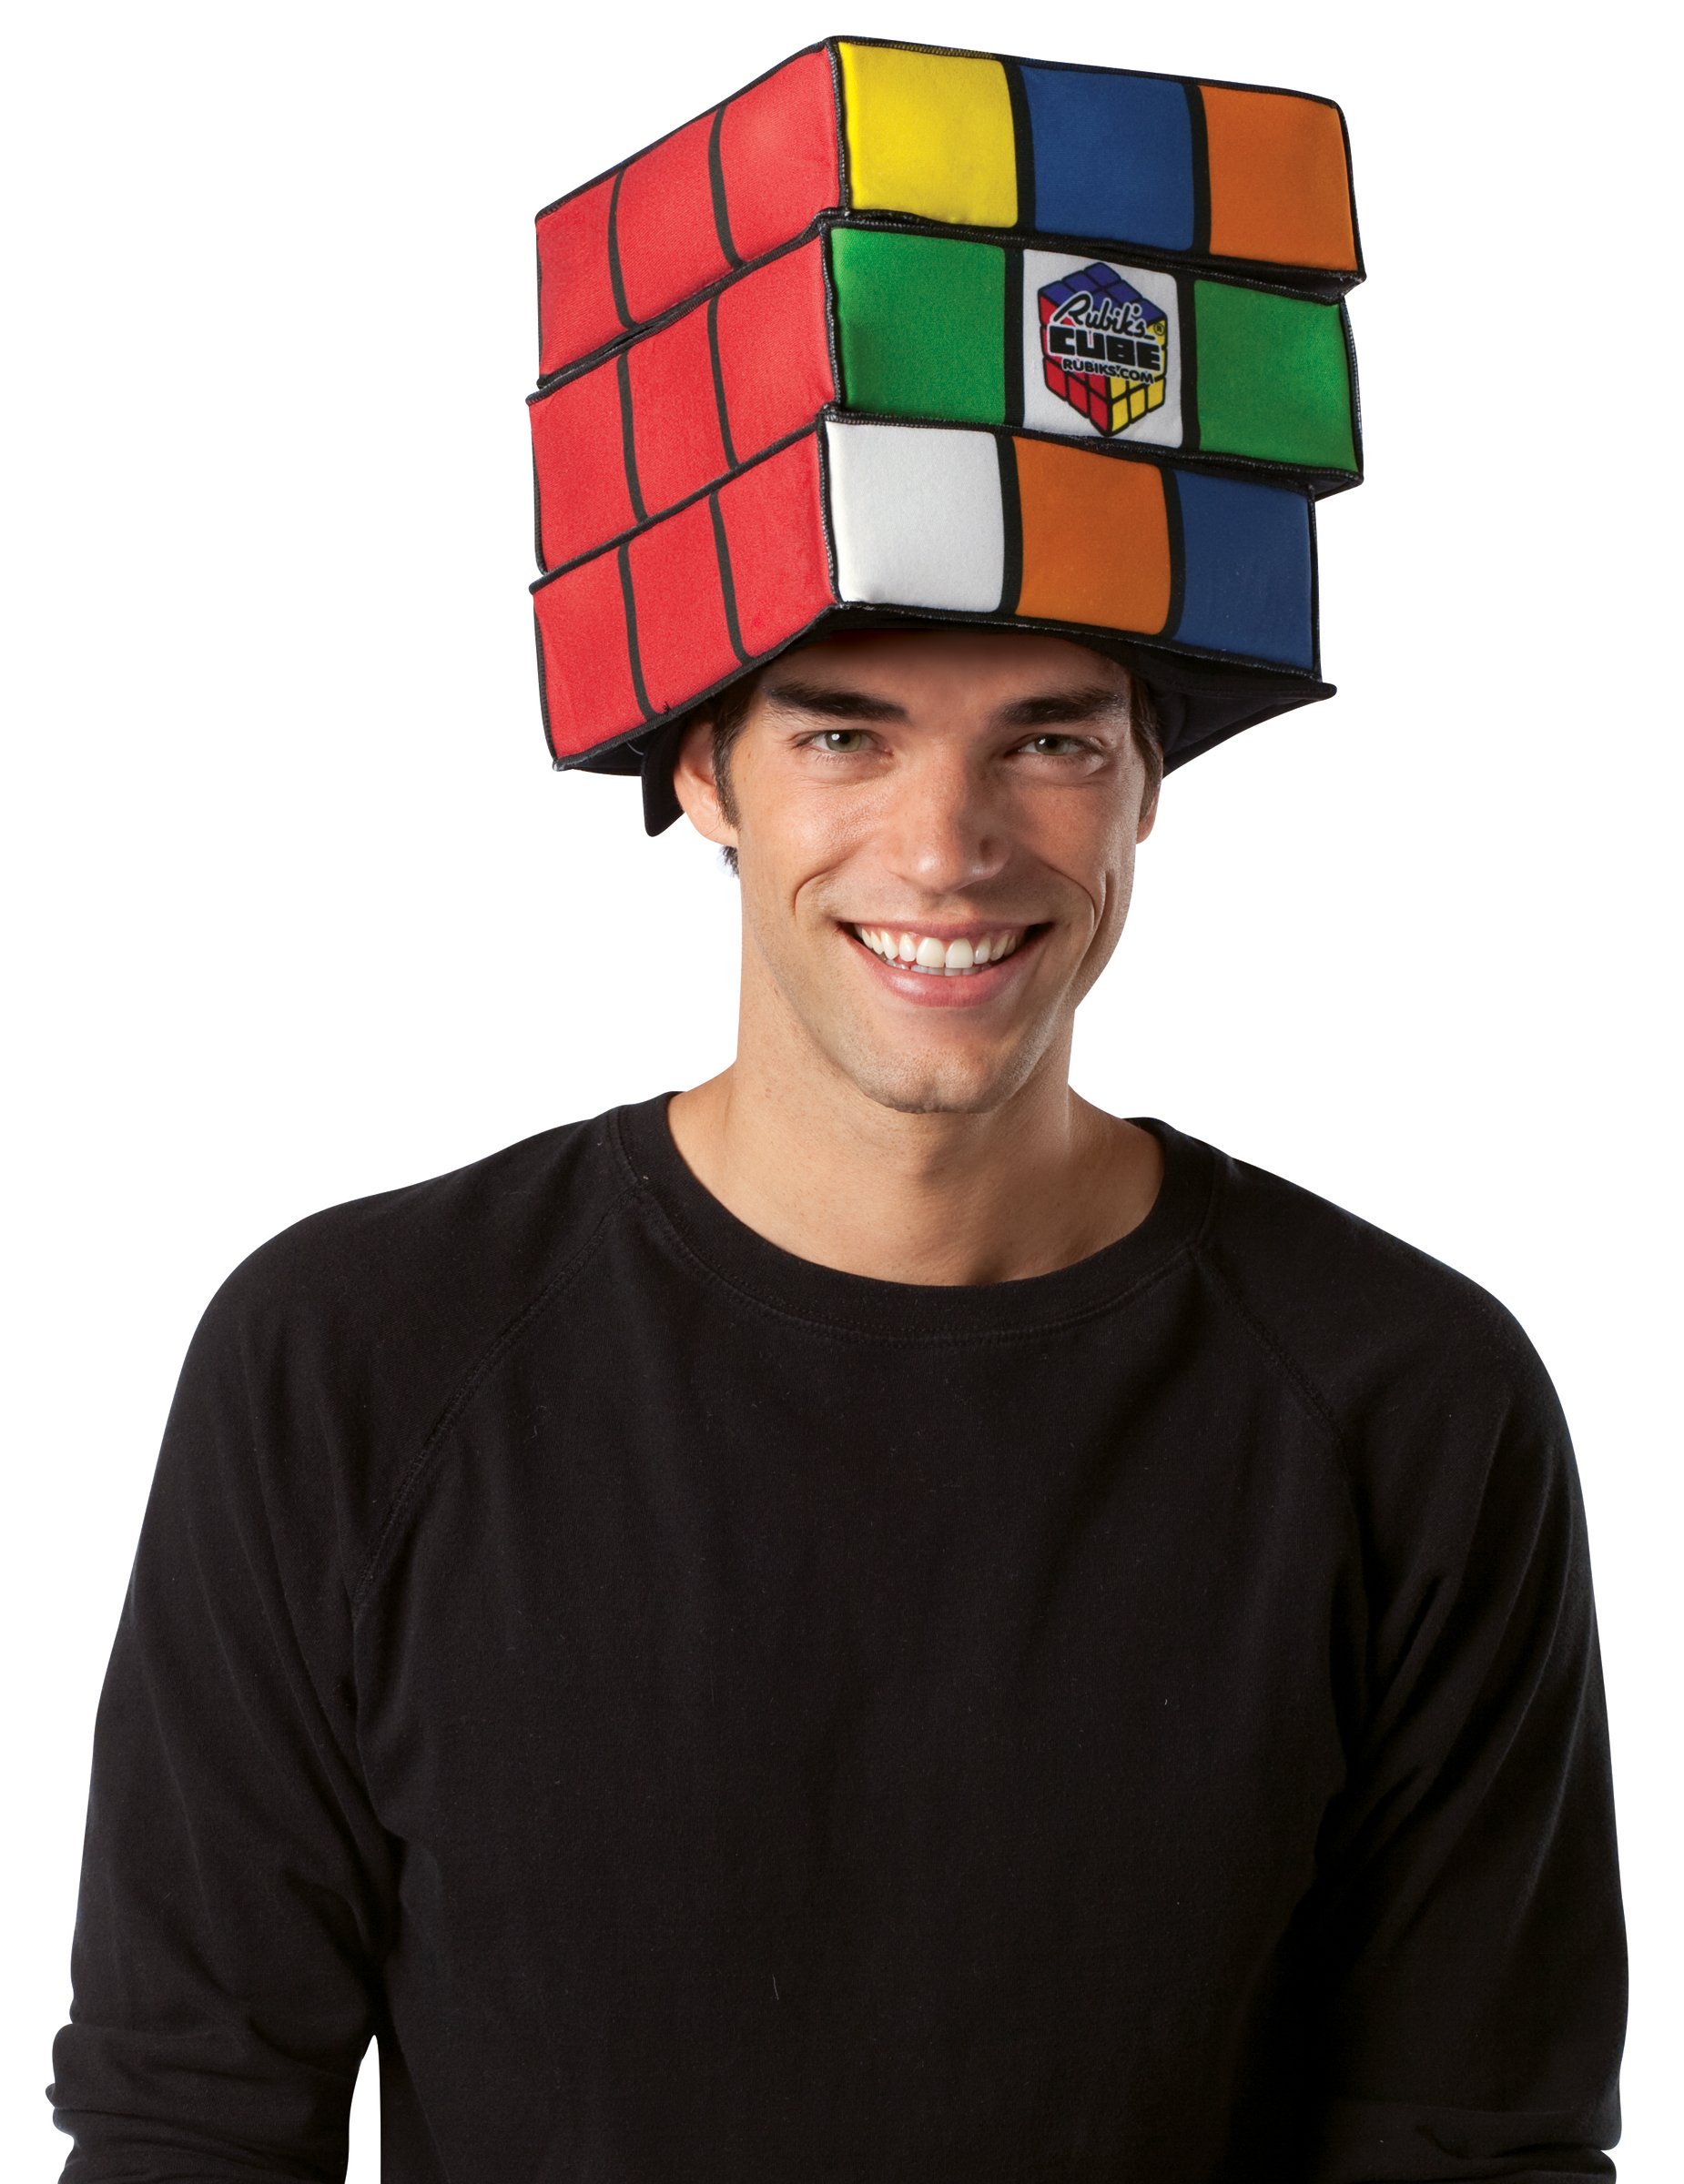 rubik's cube for adults